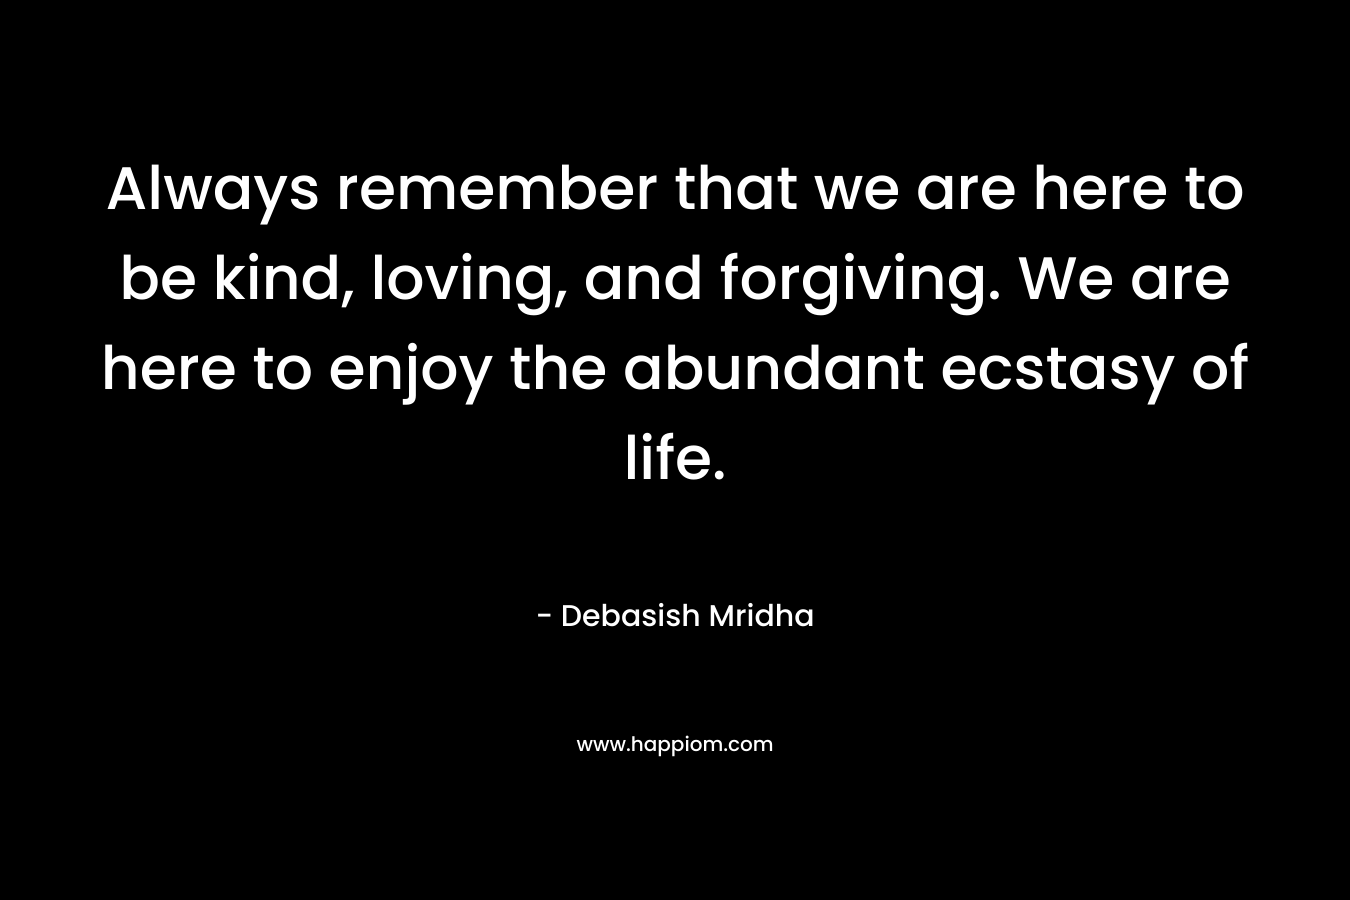 Always remember that we are here to be kind, loving, and forgiving. We are here to enjoy the abundant ecstasy of life.